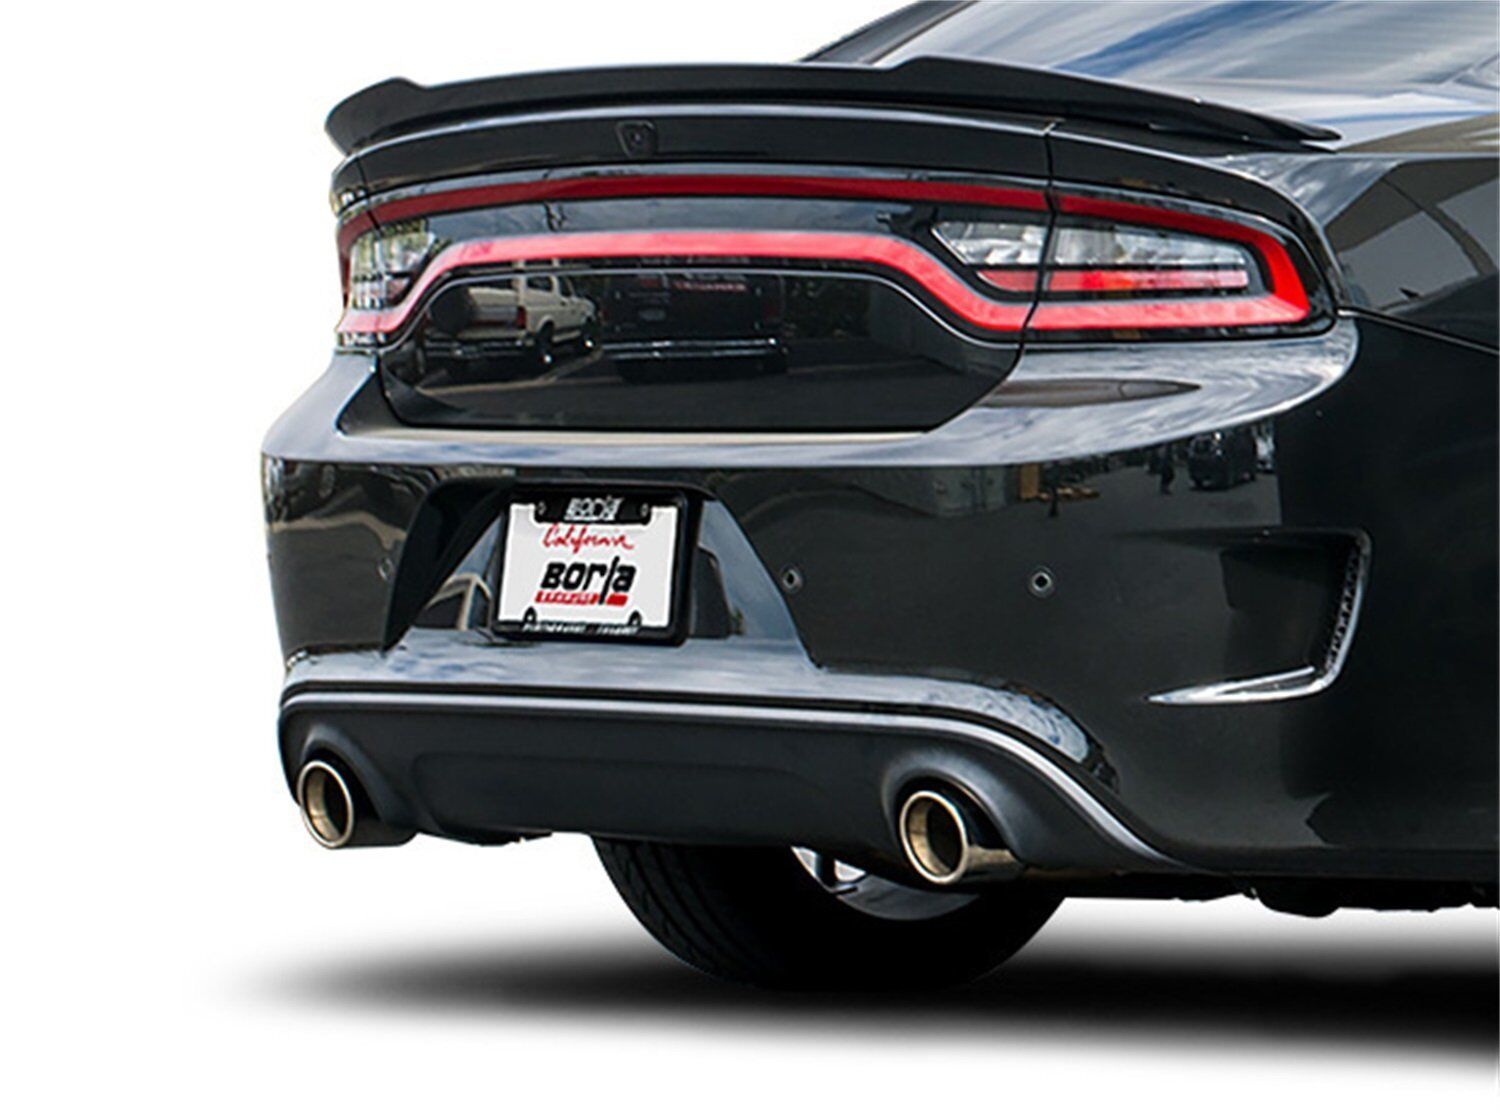 BORLA 2015-2017 DODGE CHARGER HELLCAT S-TYPE CATBACK EXHAUST SYSTEM STAINLESS